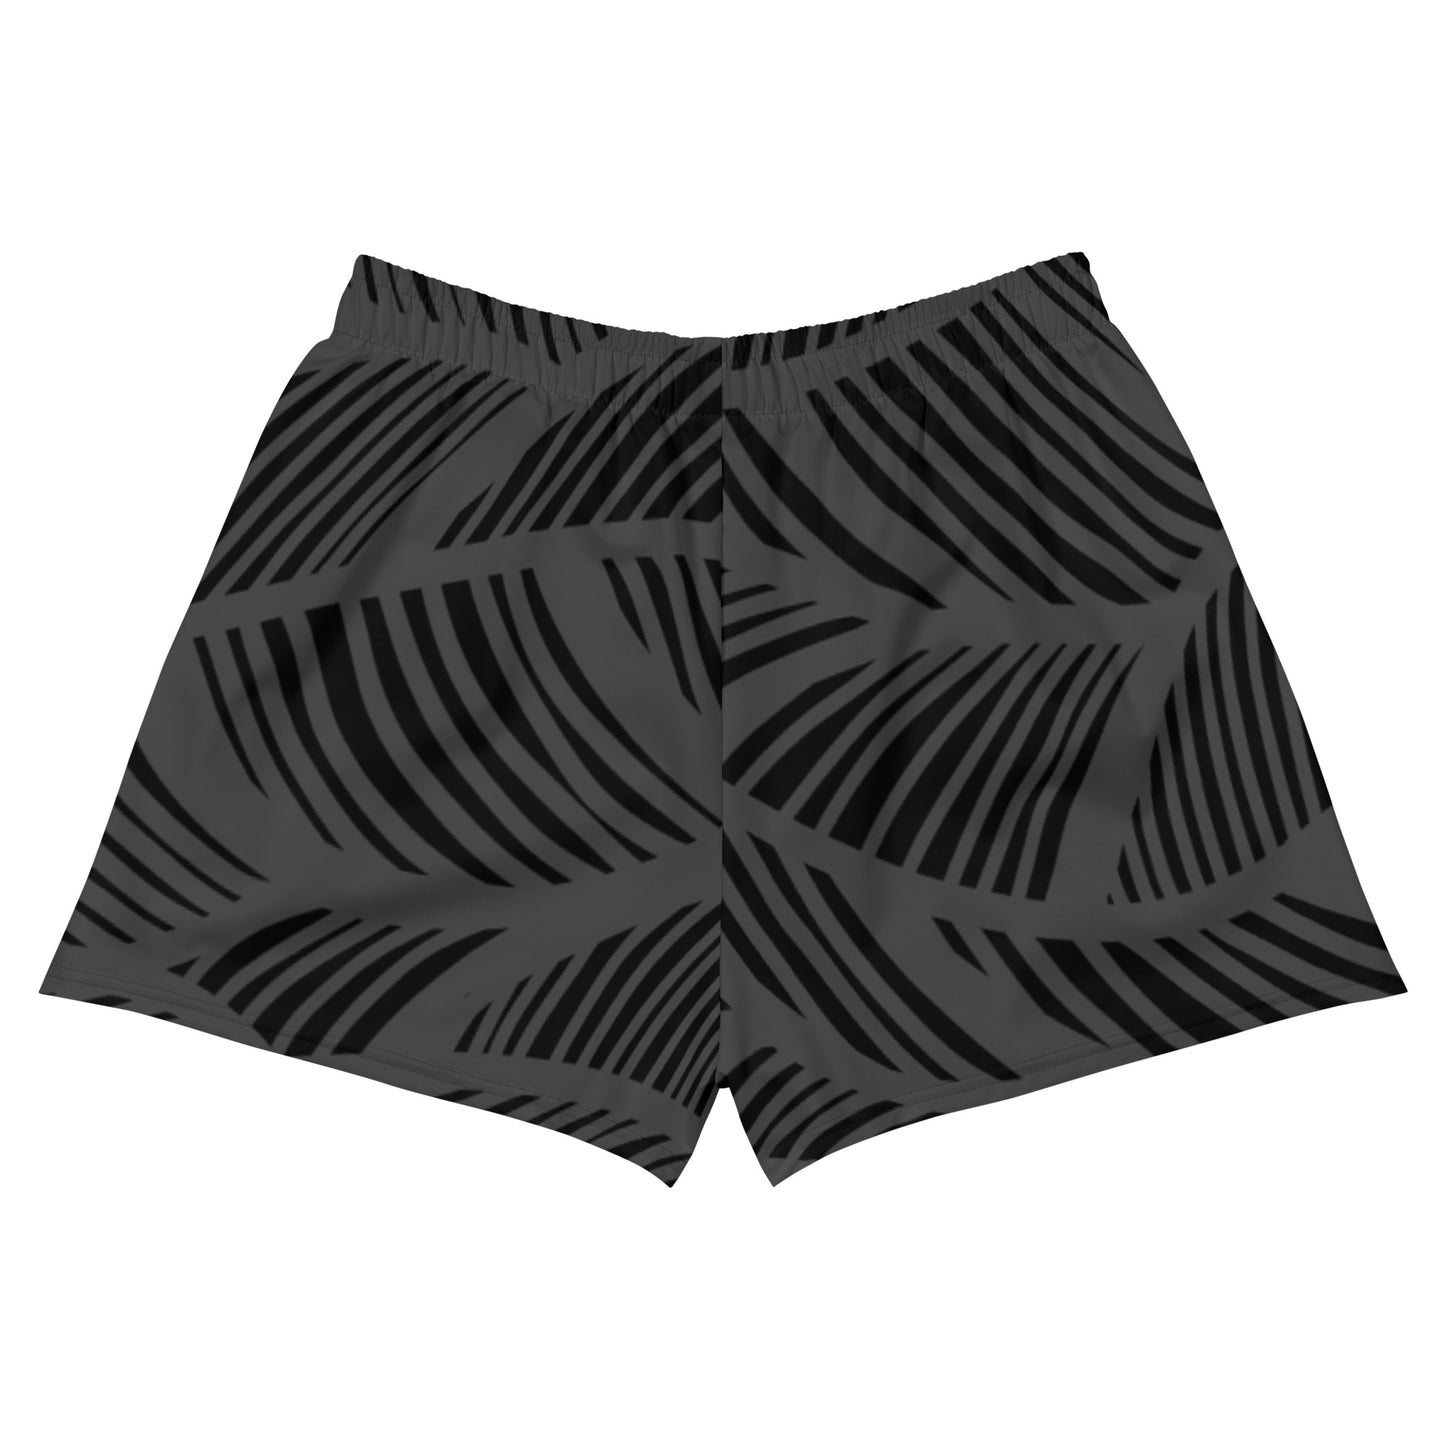 A.T.G Fitness Women's Athletic Short Shorts